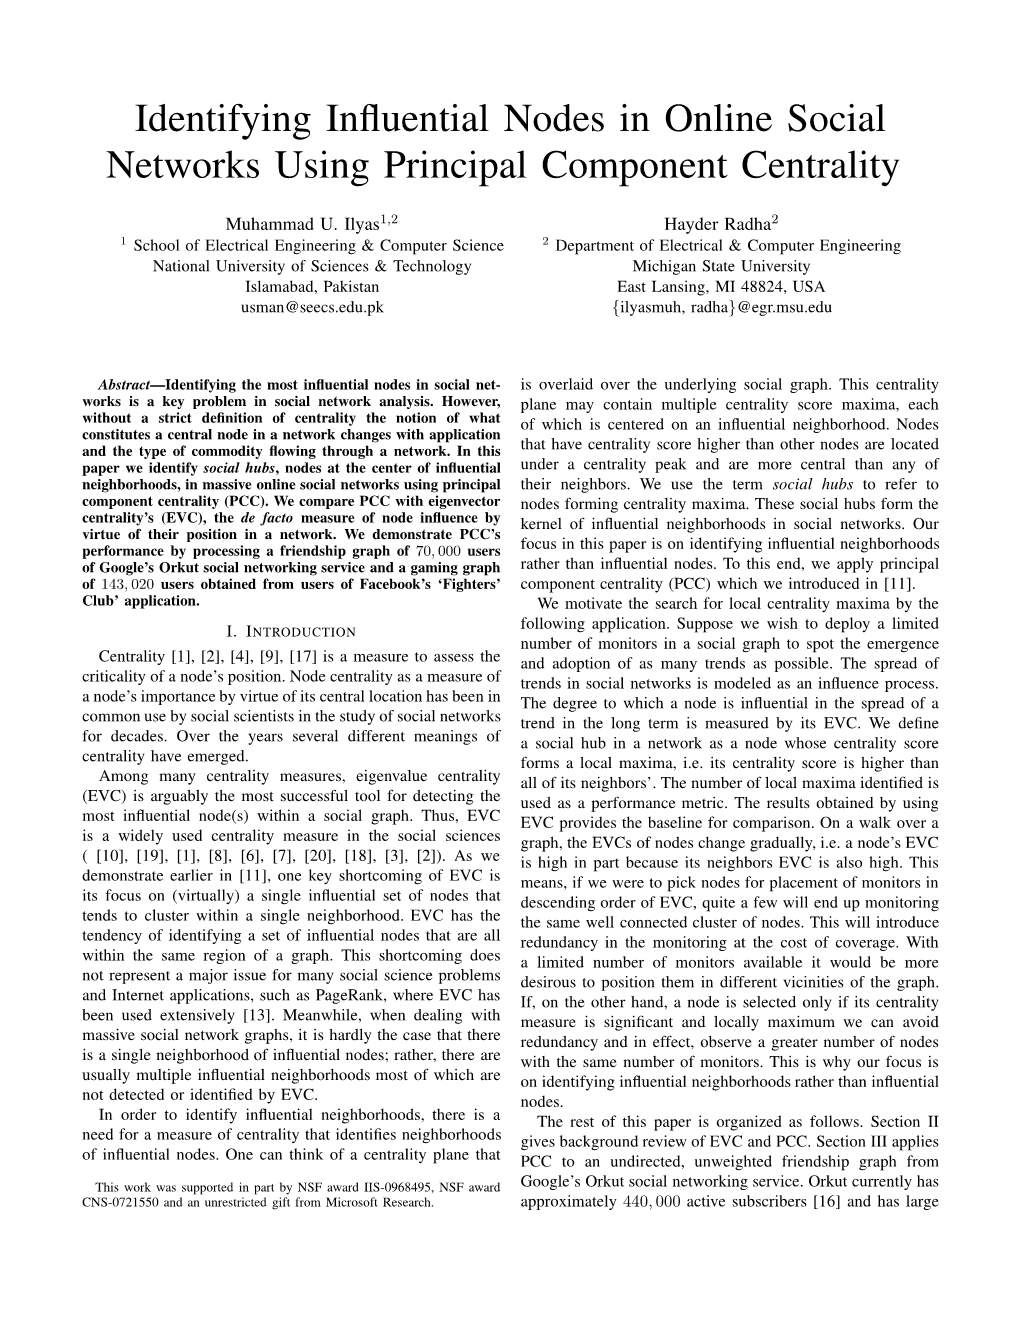 Identifying Influential Nodes in Online Social Networks Using Principal